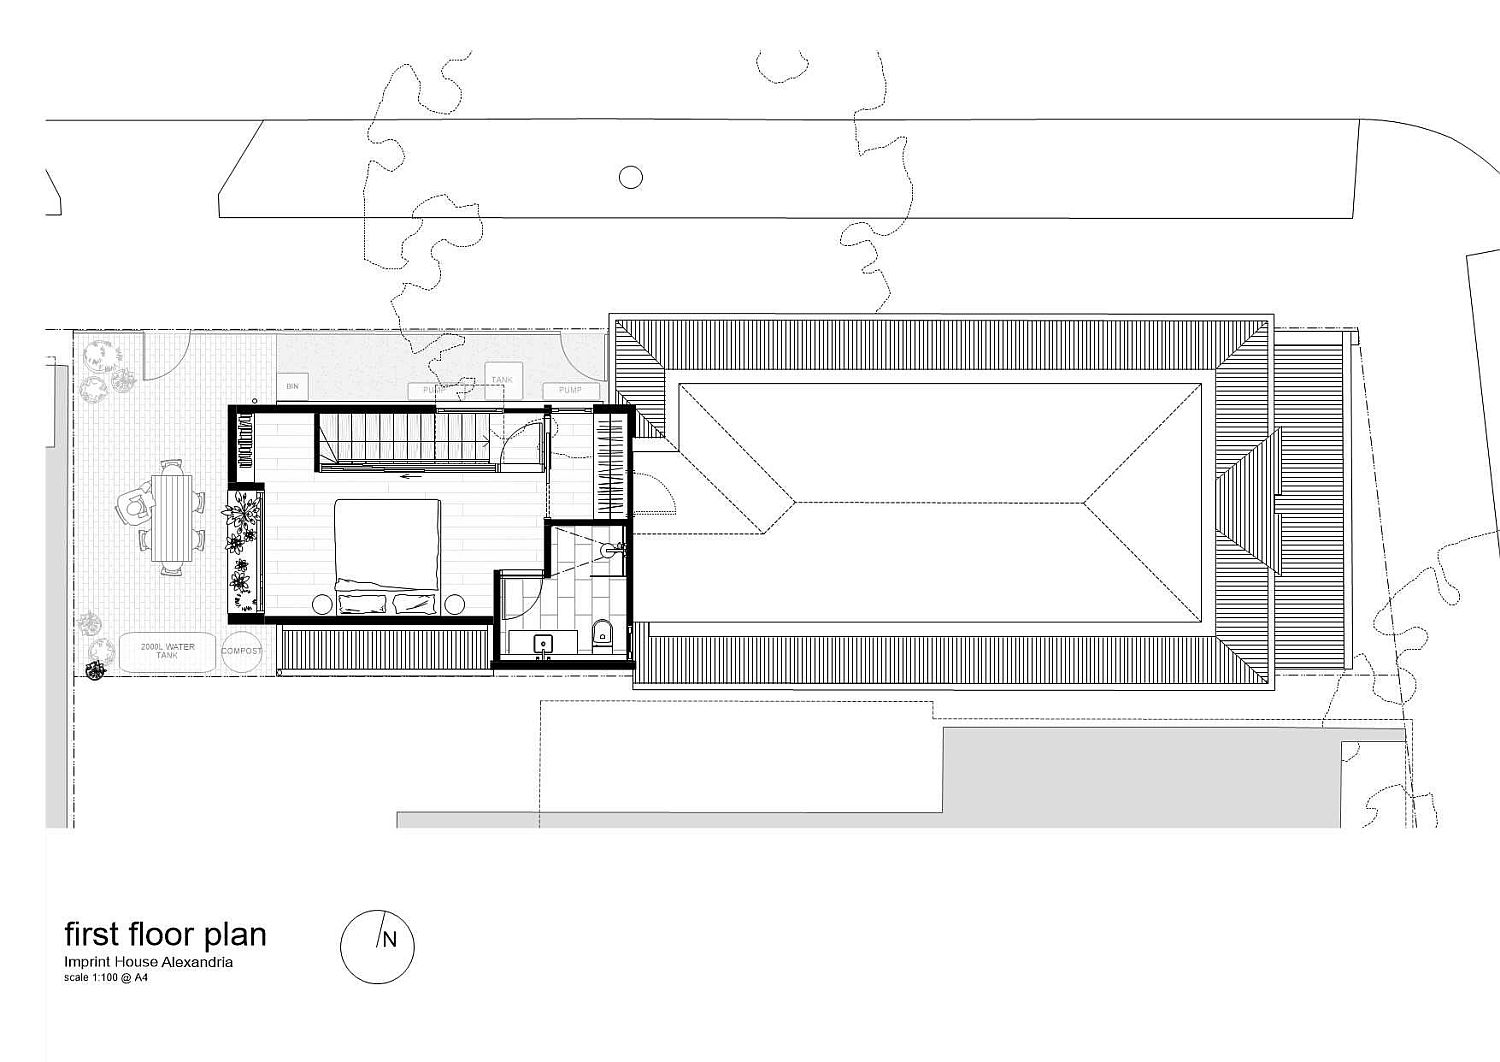 First floor plan of the revamped terrace house in Sydney